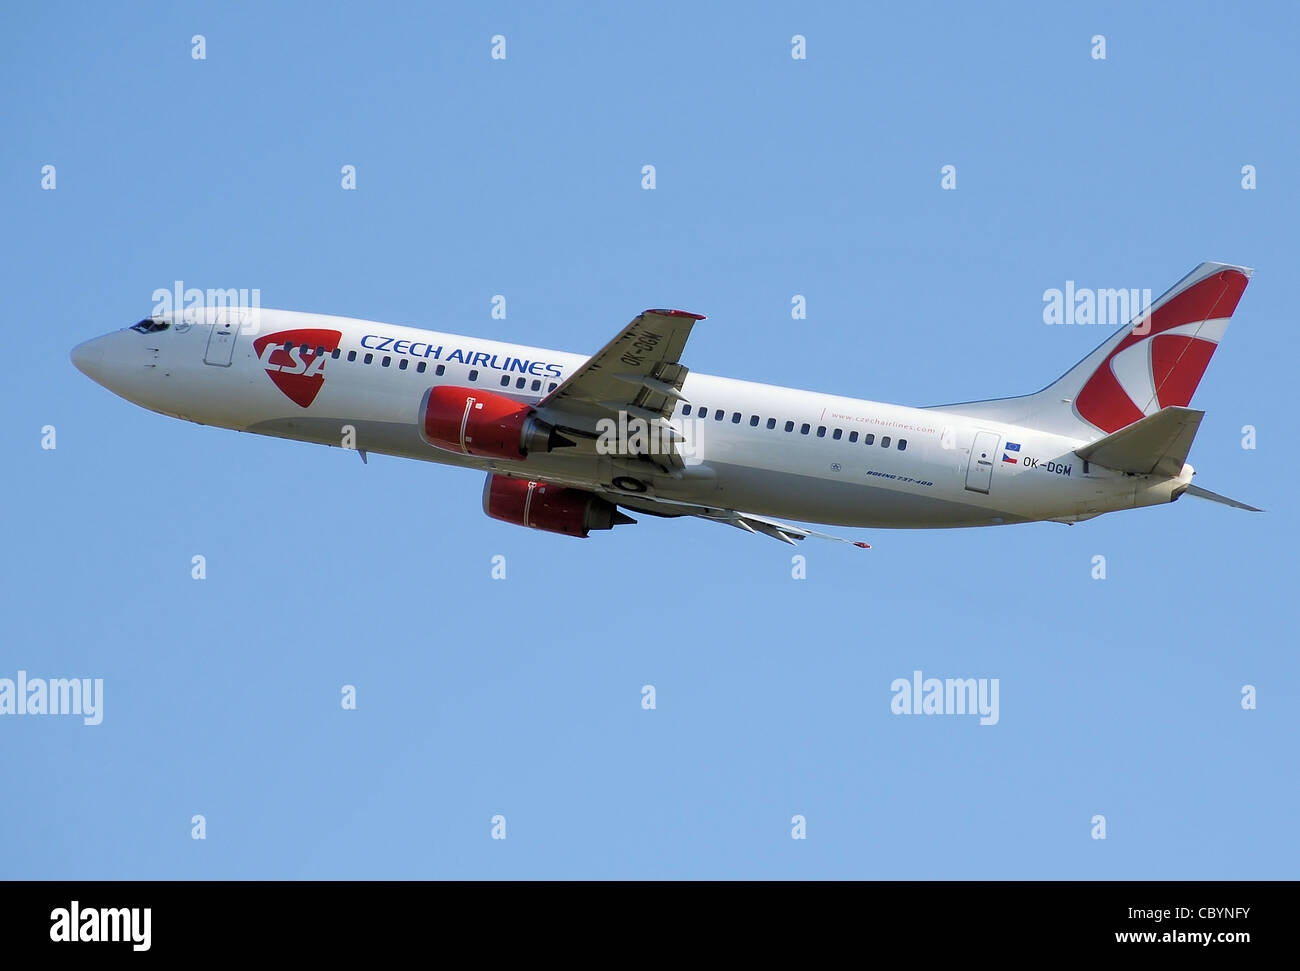 CSA Czech Airlines Boeing 737-400 (OK-DGM) takes off from London Heathrow Airport. Stock Photo